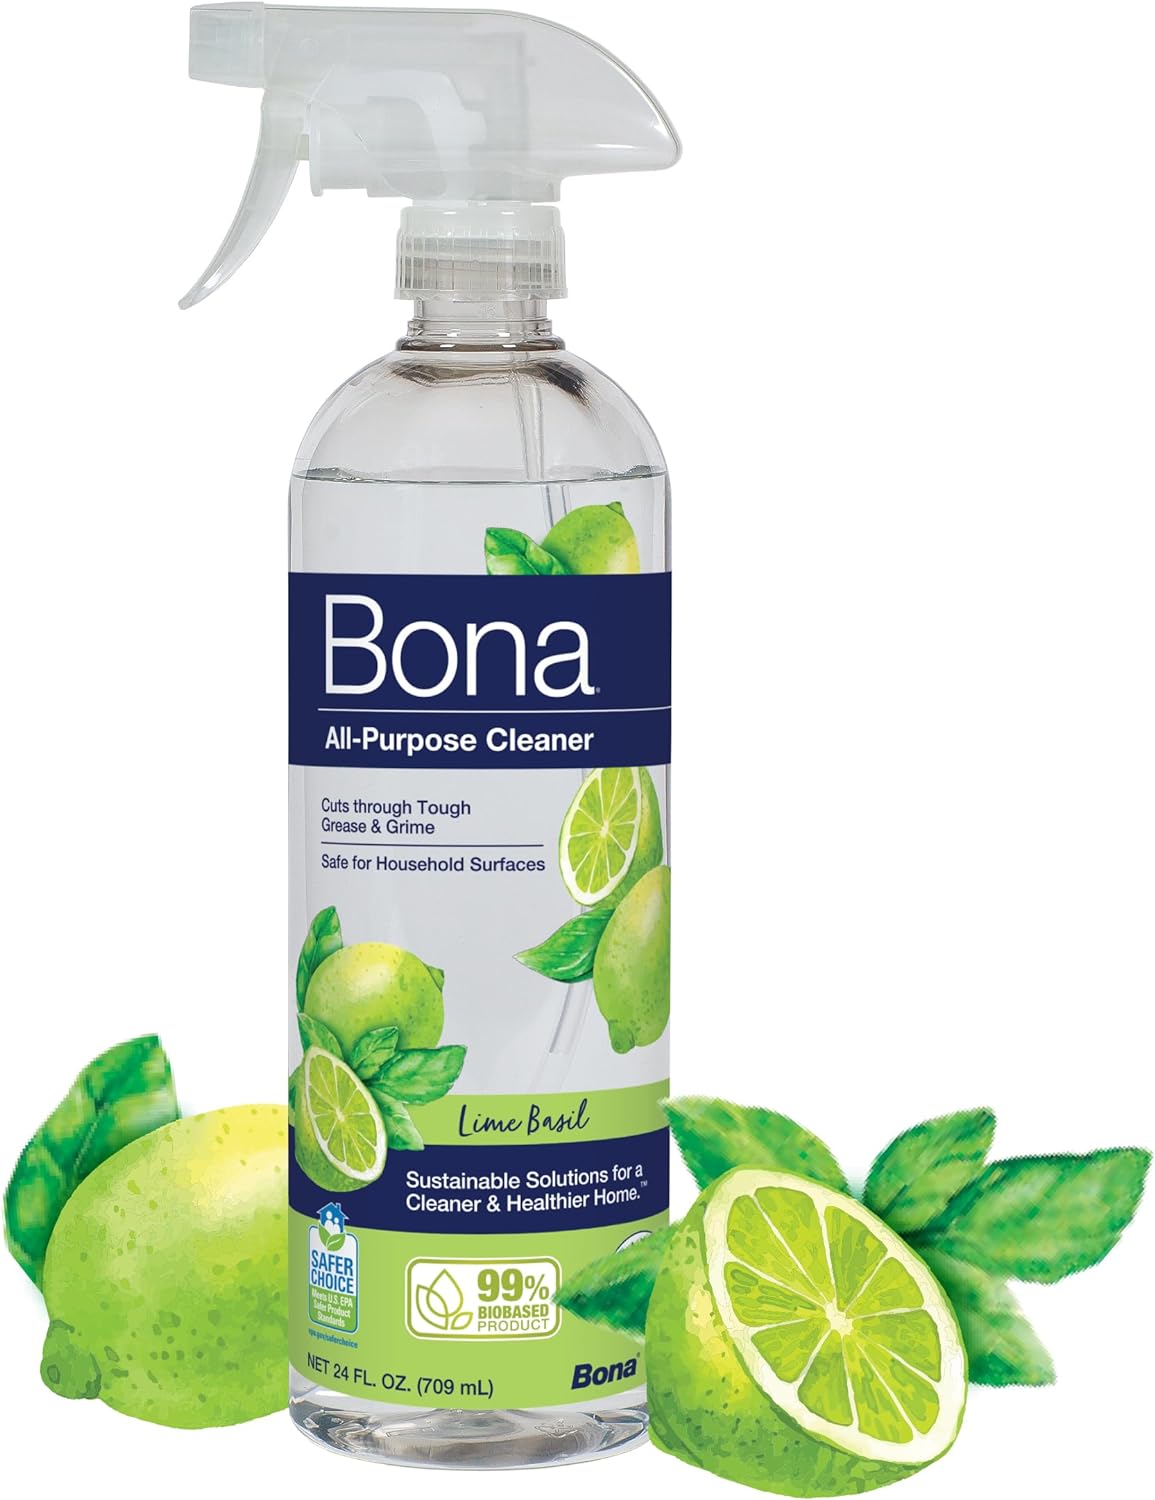 Bona All-Purpose Cleaner, Lime Basil Scent